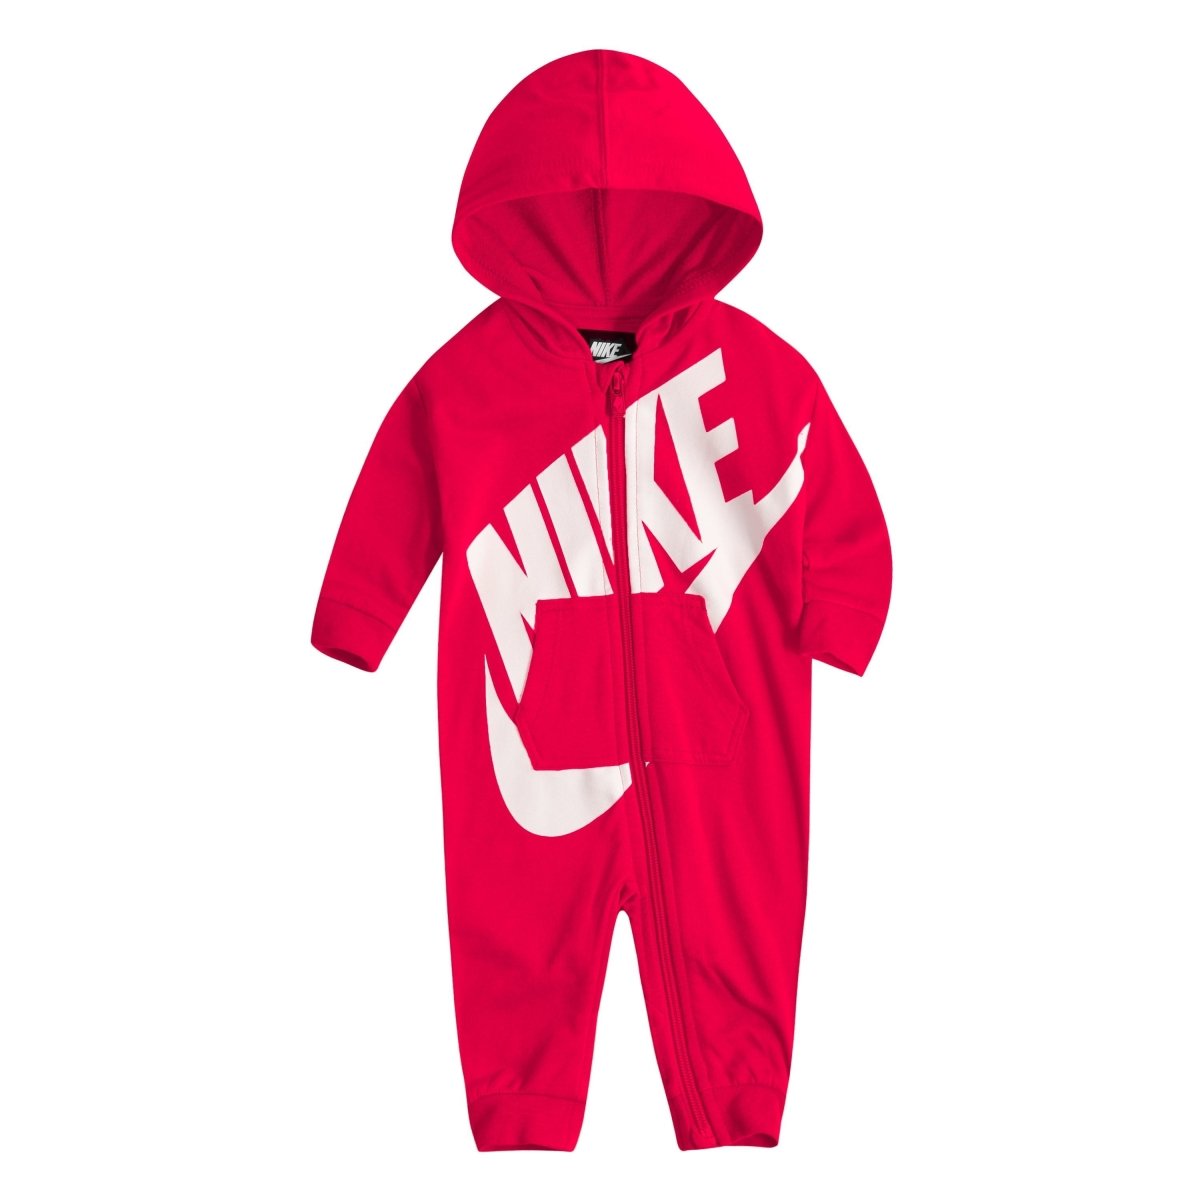 Nike NIKE INFANT'S CHEVRON PINK COVERALL ONESIE - INSPORT